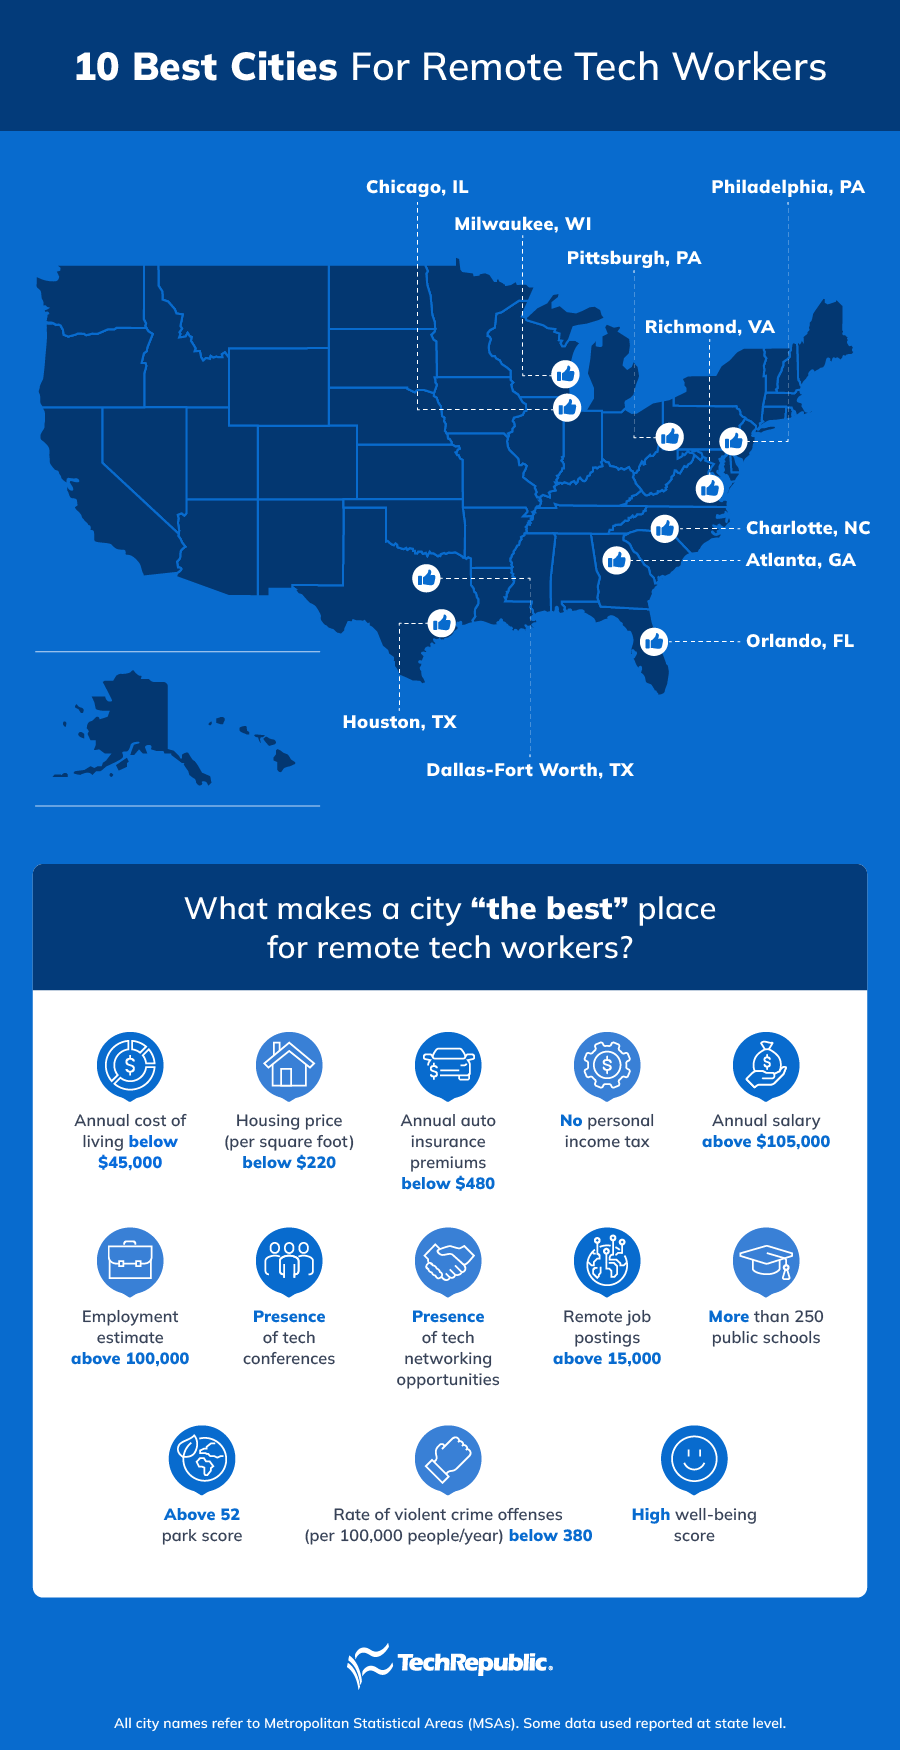 A U.S. map showing TechRepublic's 10 best cities for remote tech workers, and the criteria on what makes a city the best place for remote tech workers.